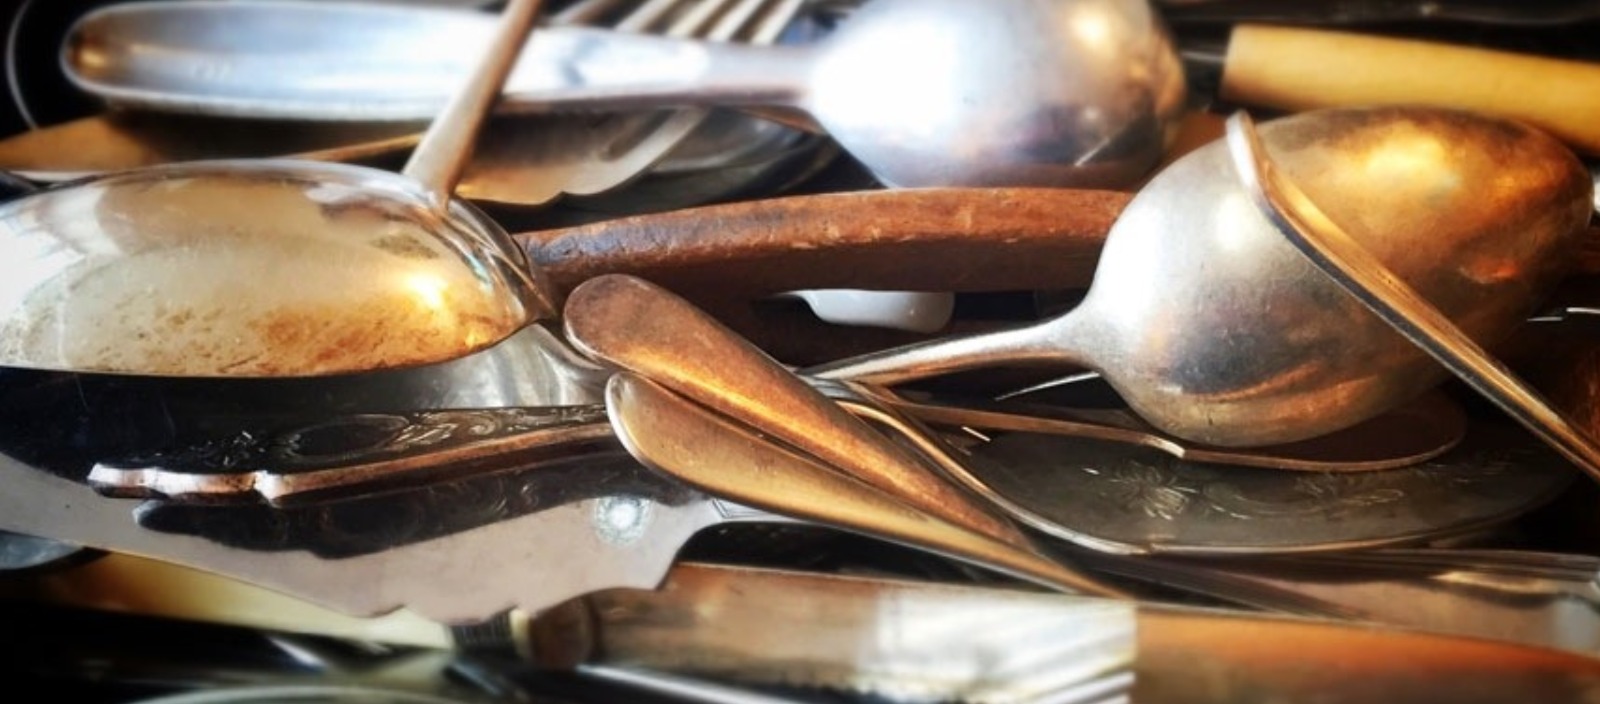 Why do we need props in food photography ? Spoons